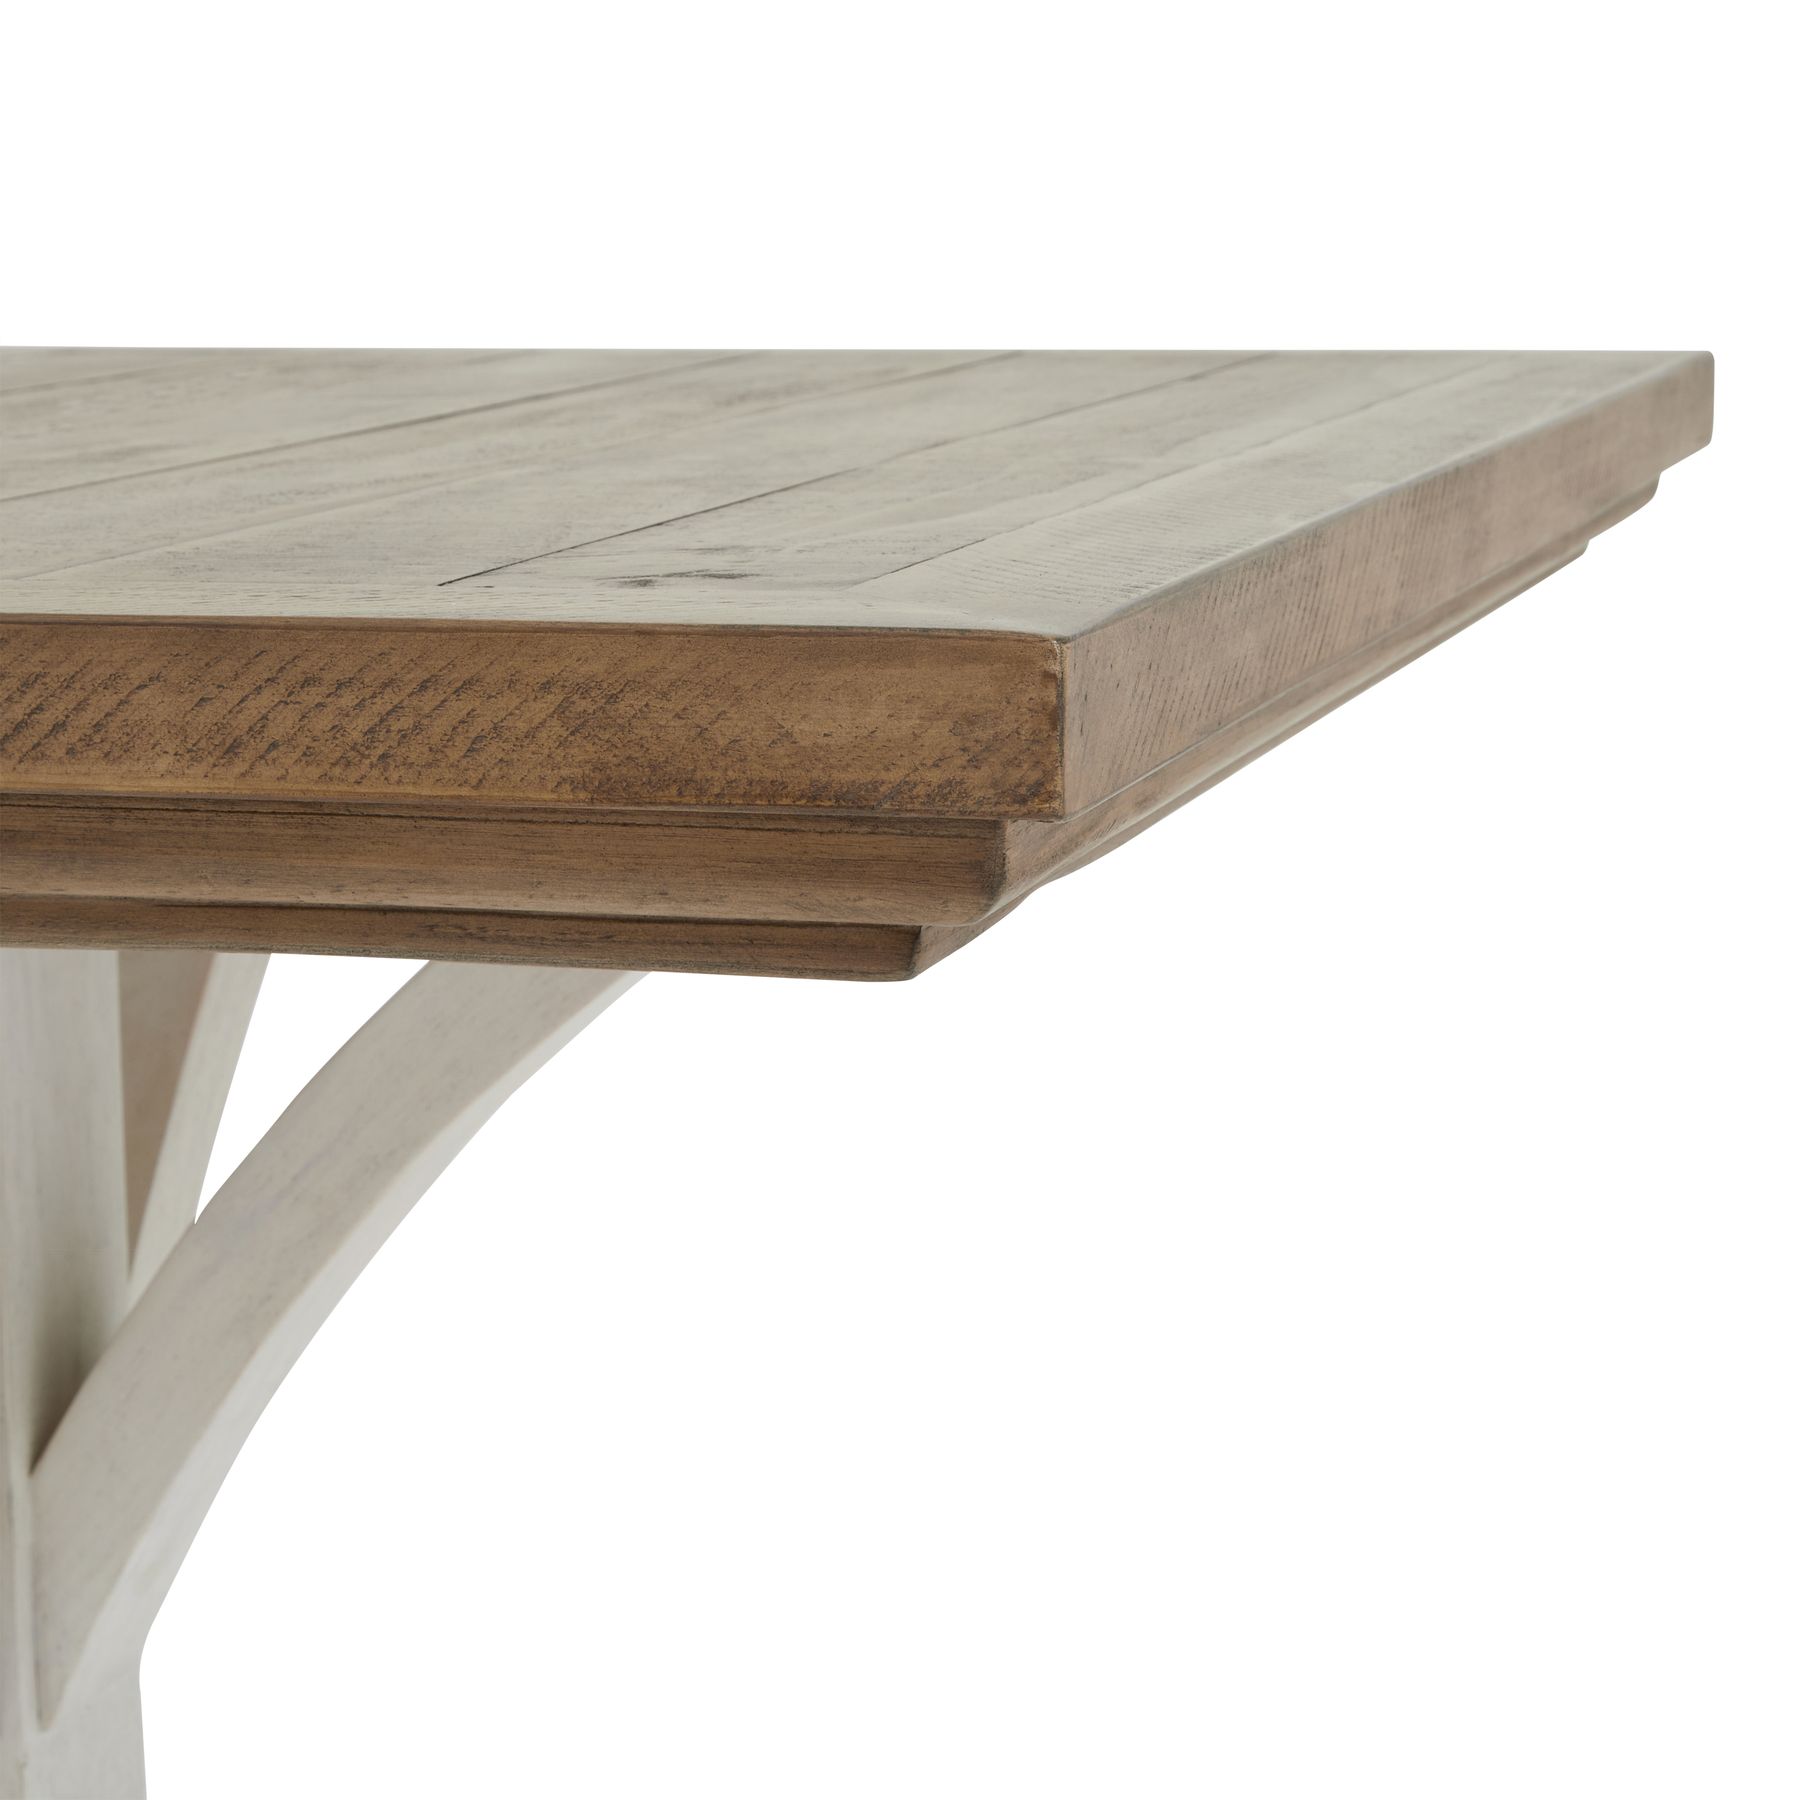 Luna Collection Square Dining Table - Image 3